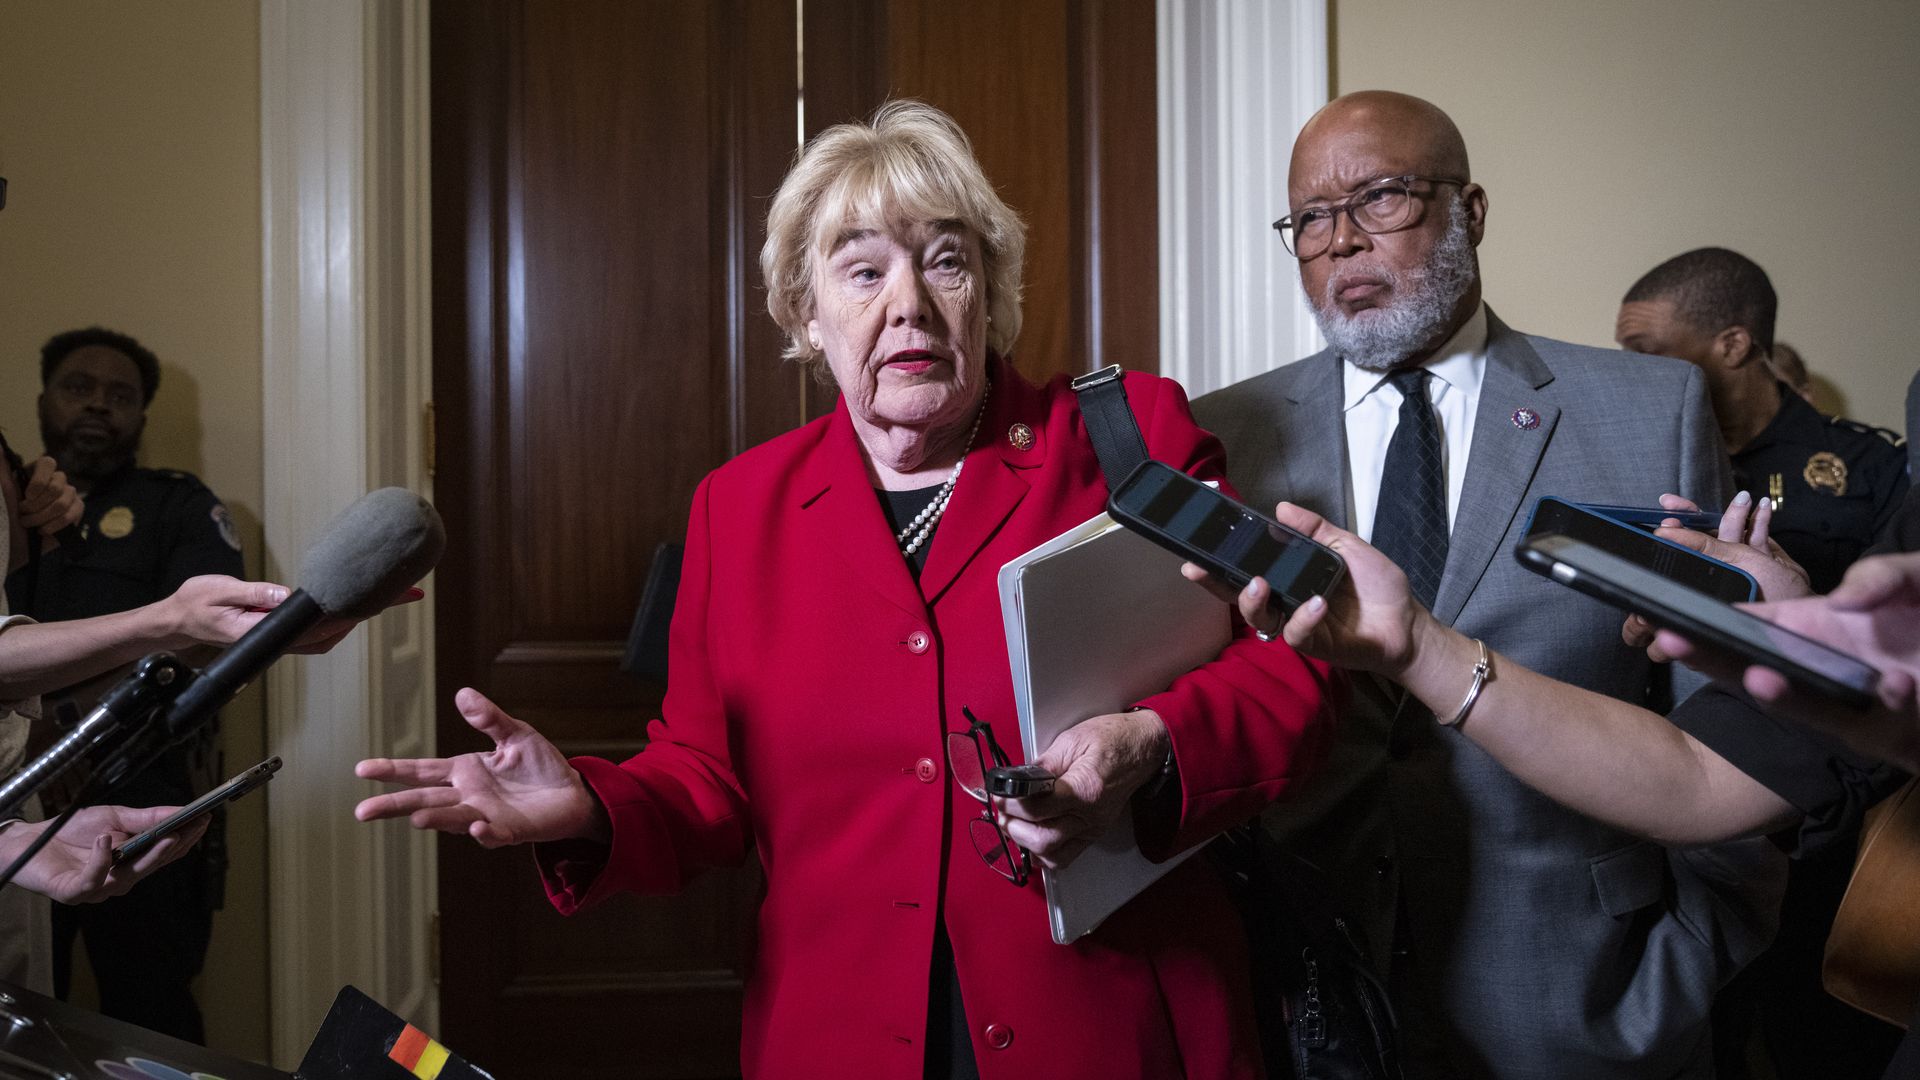 Reps. Zoe Lofgren and Bennie Thompson speak to reporters at the Capitol.